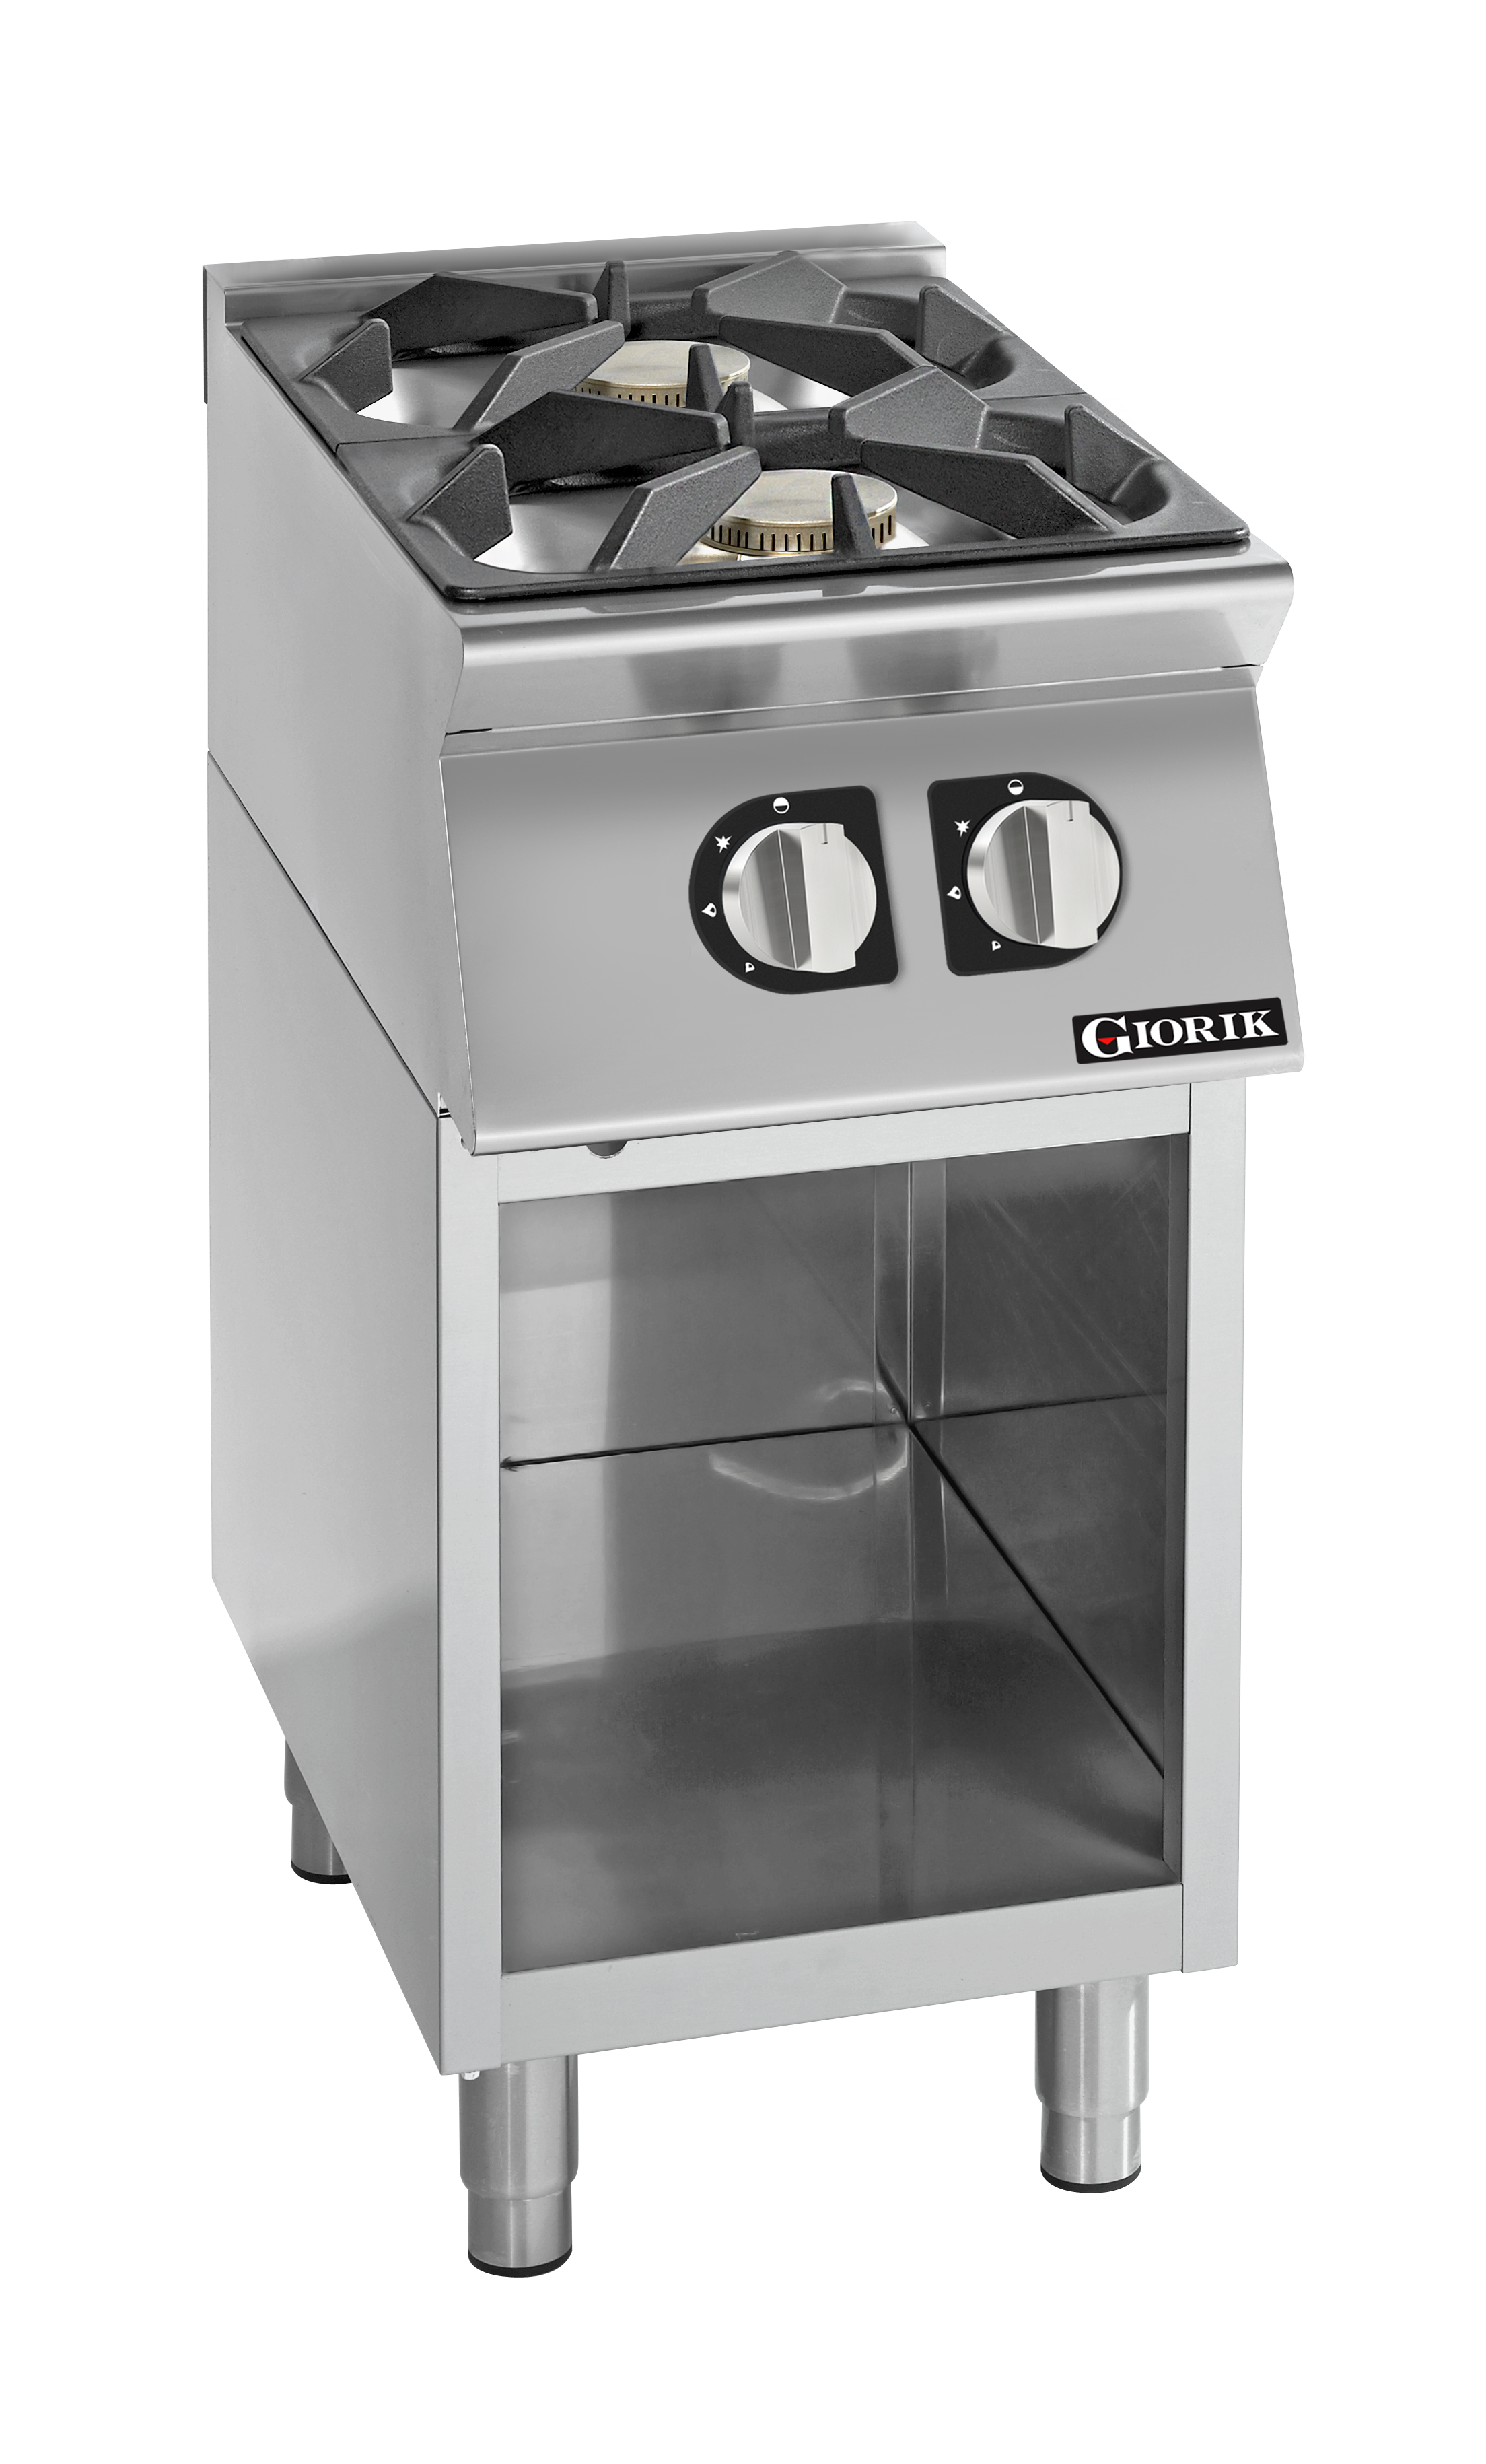 Thumbnail - Giorik 700 Series CG720GT - Cook Top With Open Base